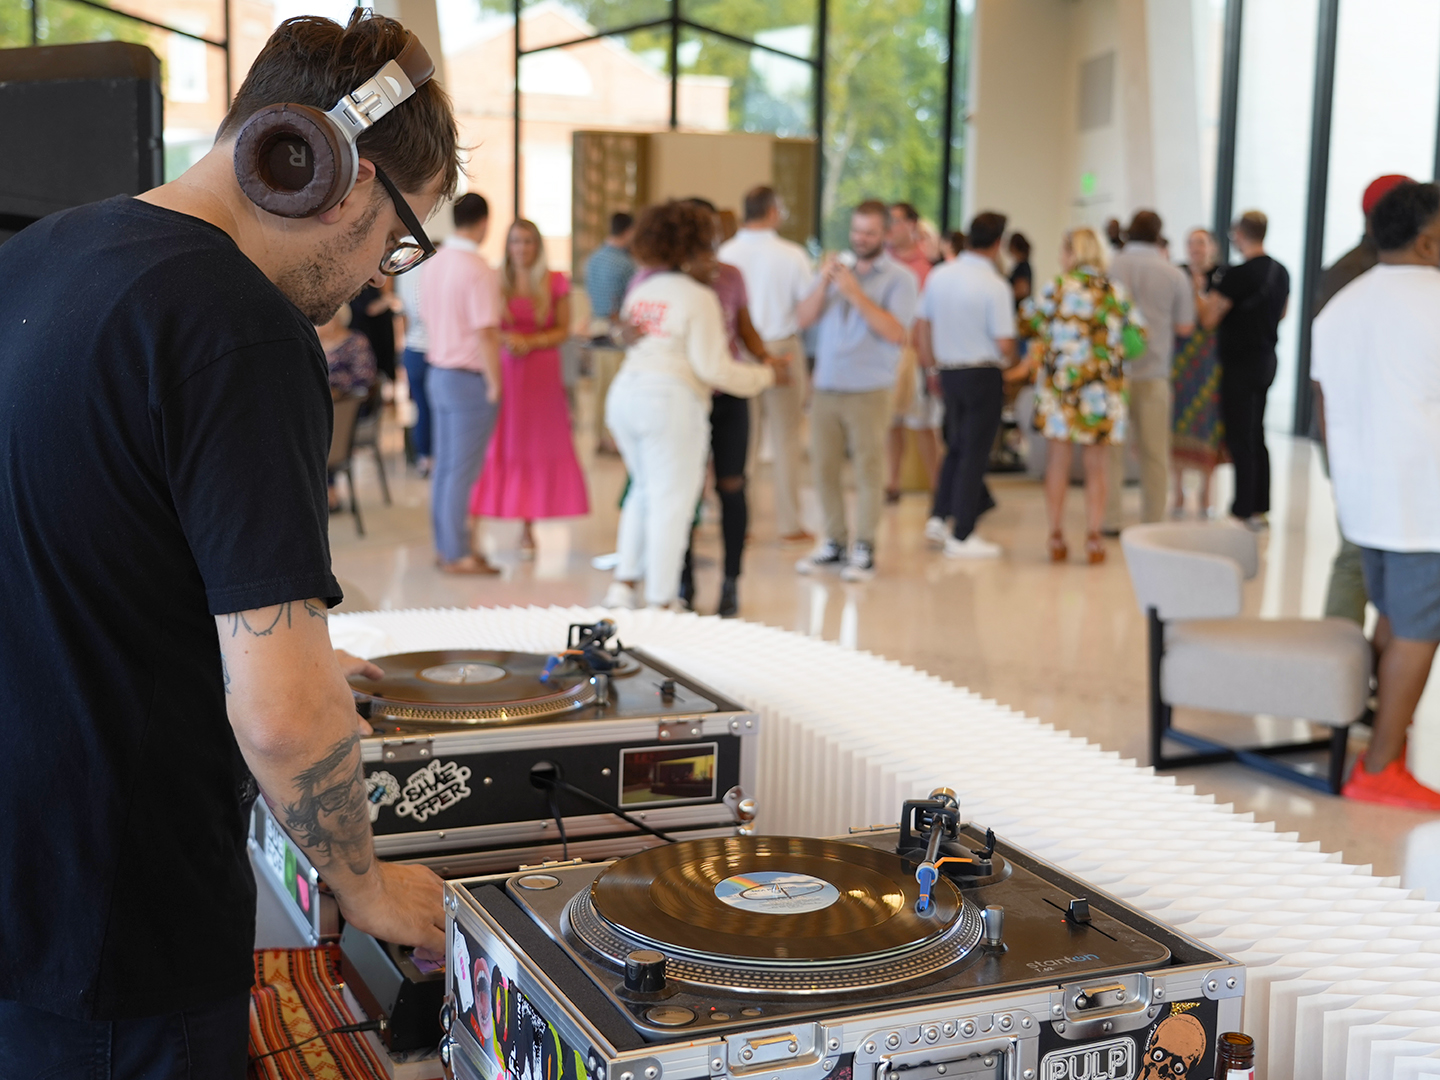 Photo of a DJ mixing records on a set of turntables with groups of people mingling and dancing at a party in the background.